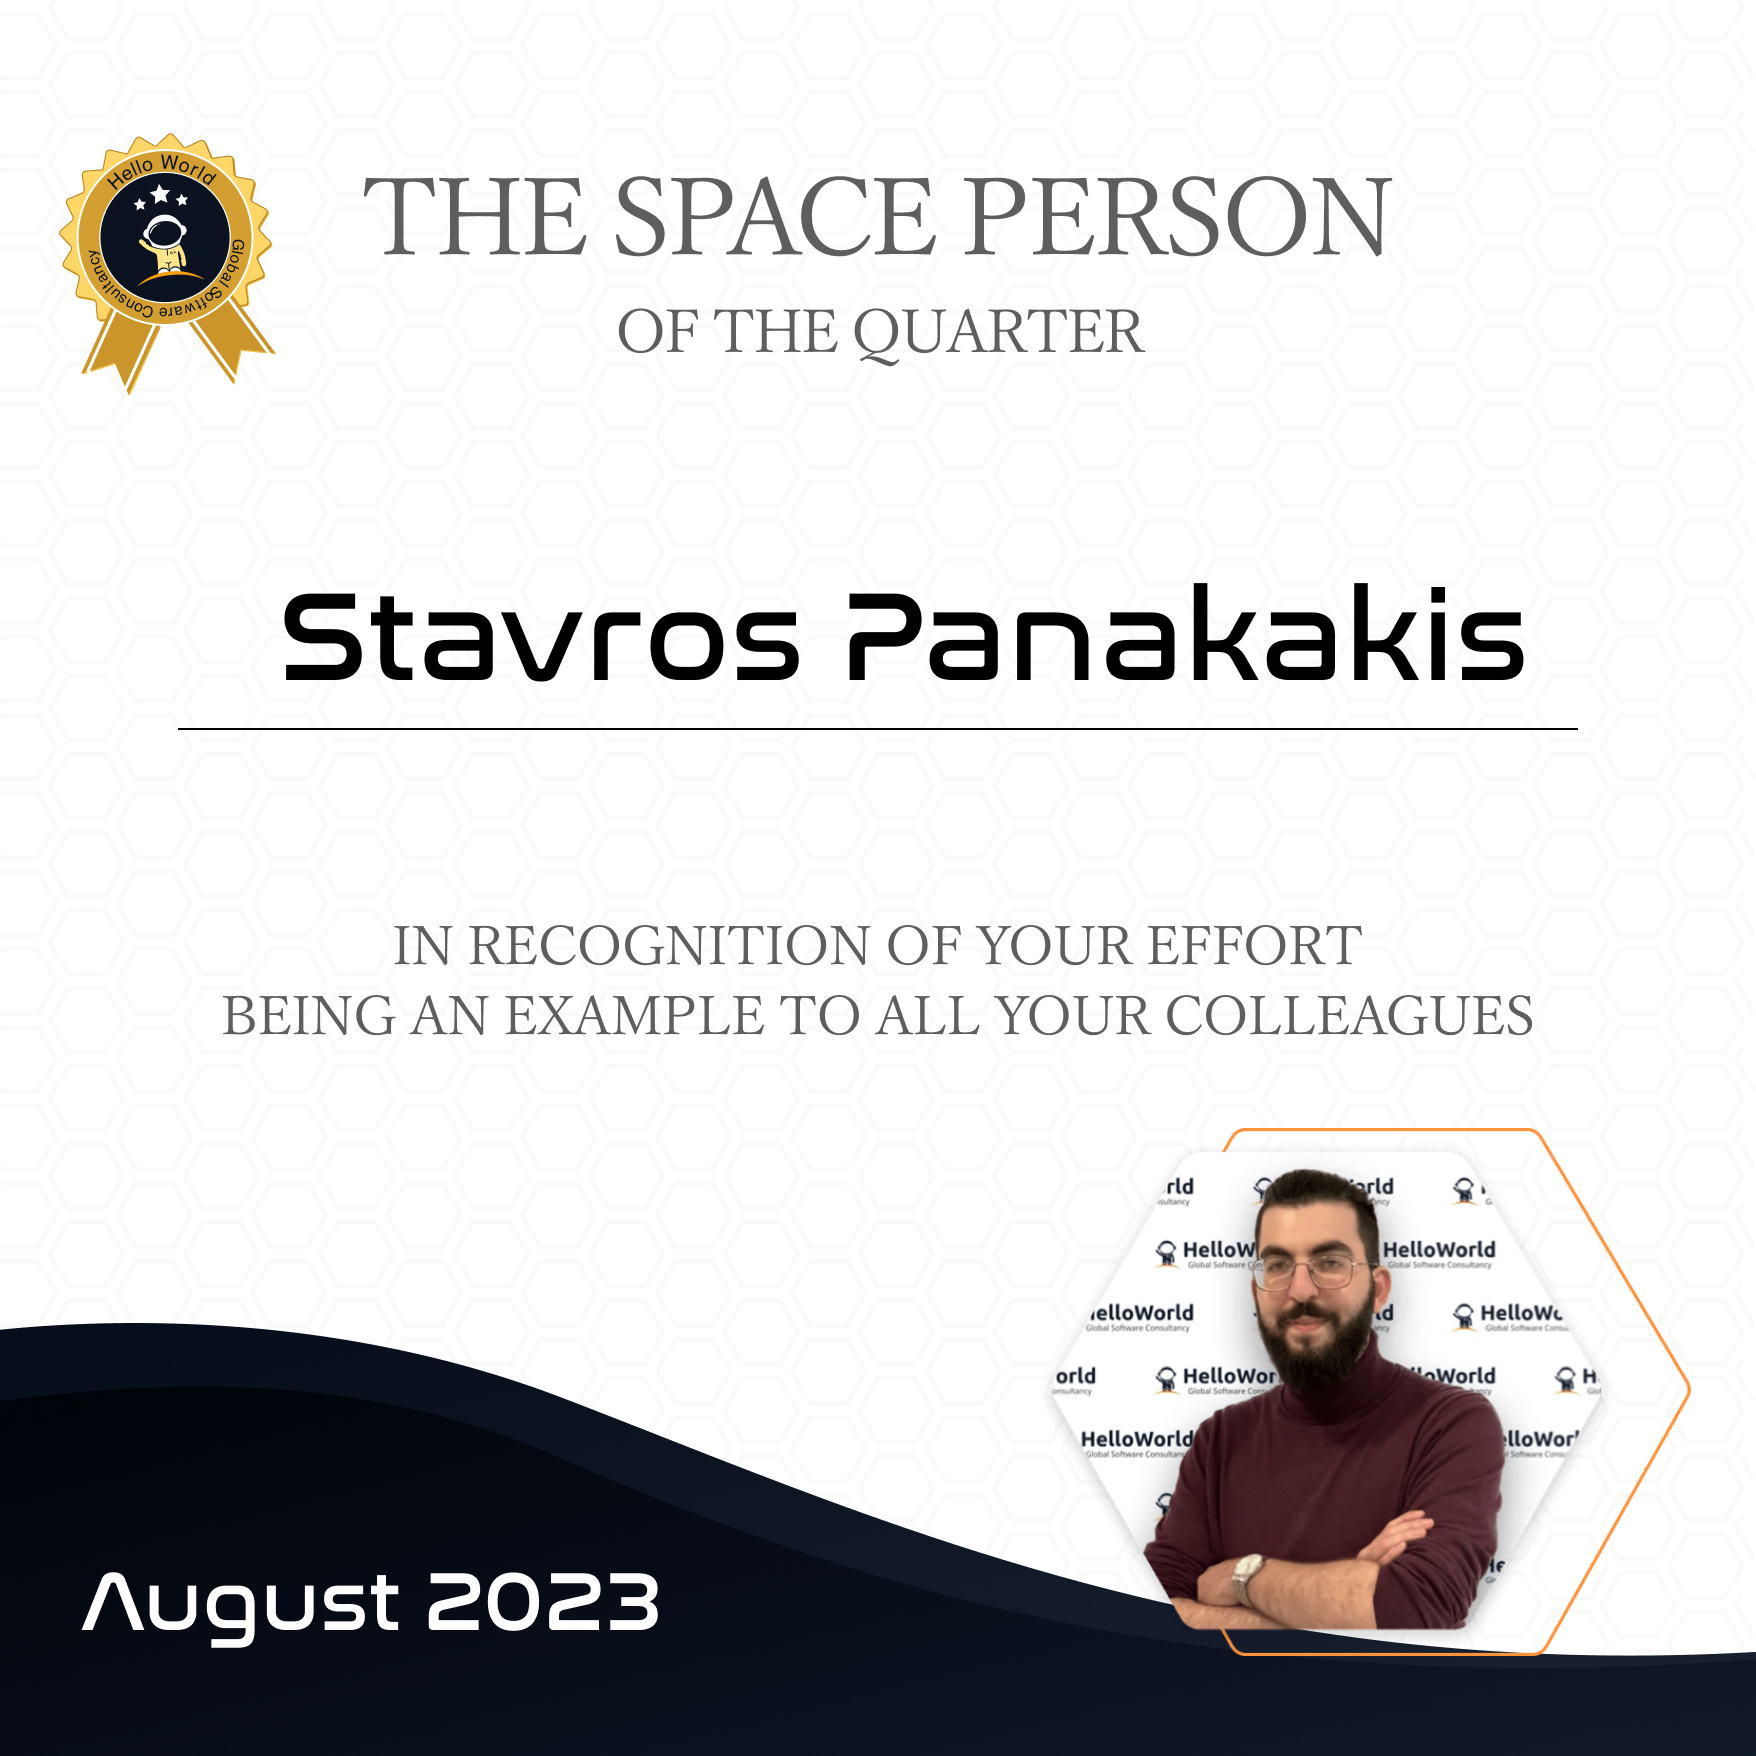 Space Person, 2nd quarter 2023